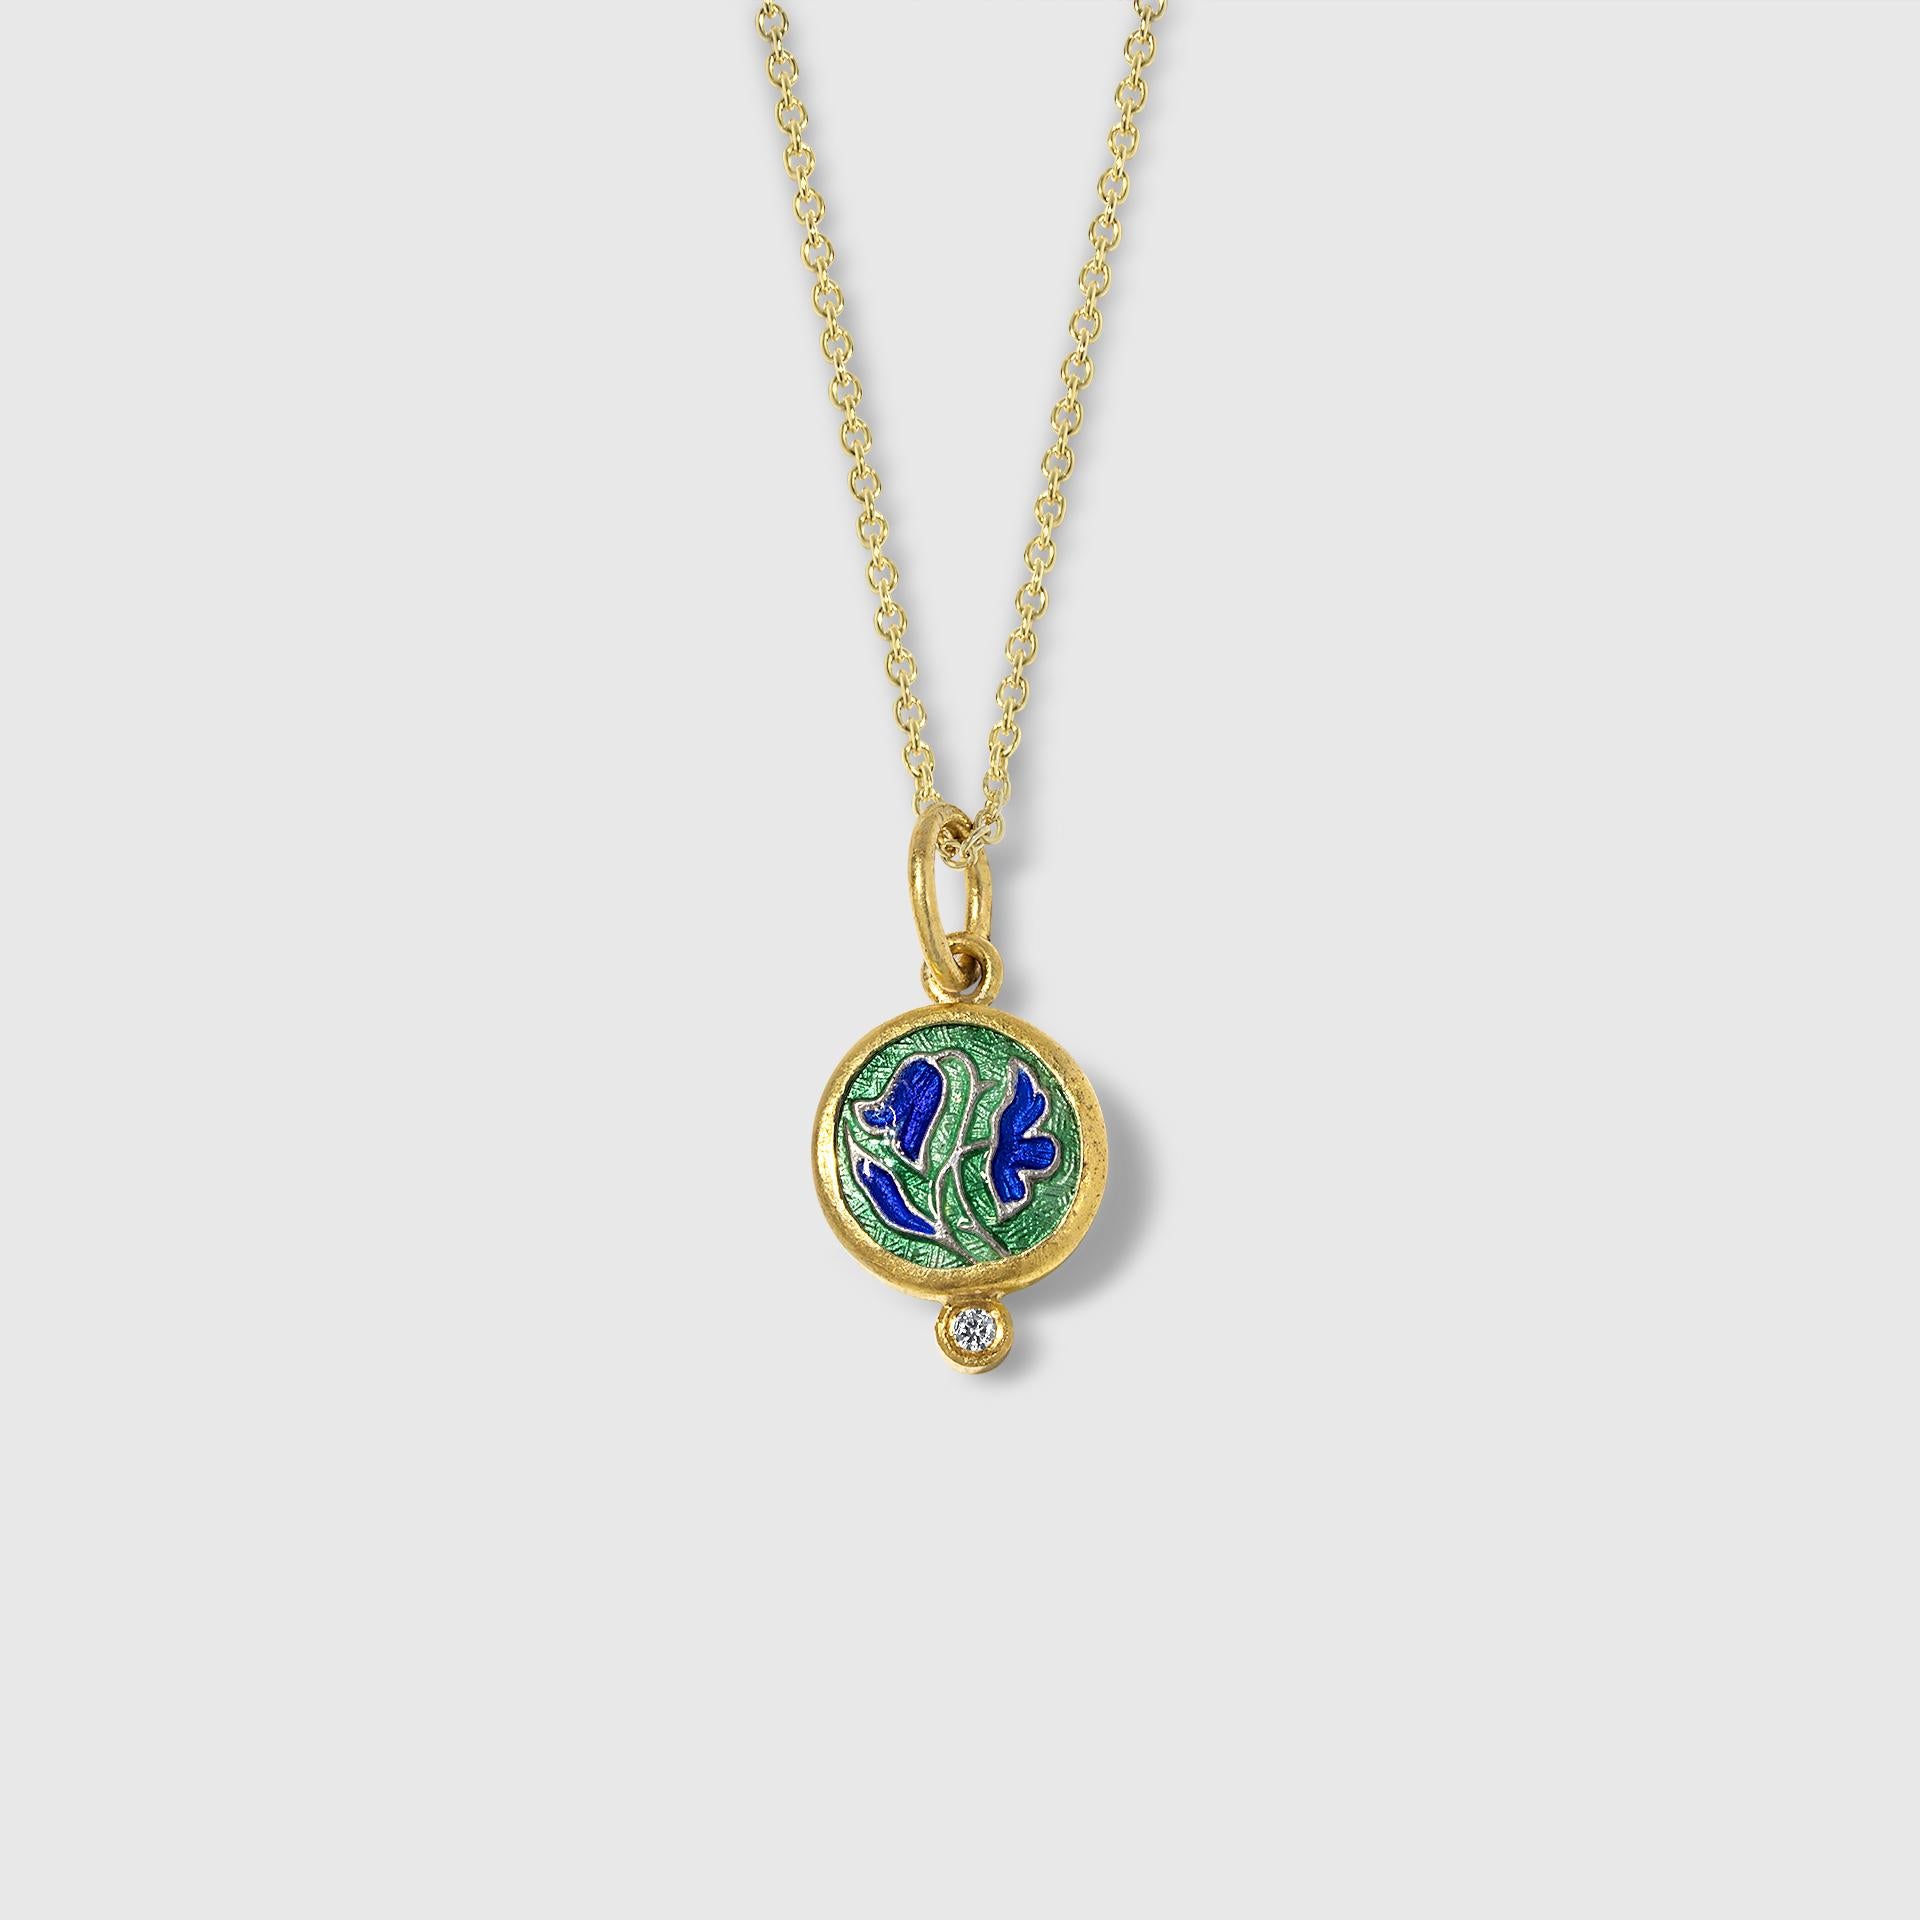 Round Cut Enamel Tulips Charm in Green & Blue, Amulet Pendant Necklace w/ Diamond 24k Gold For Sale